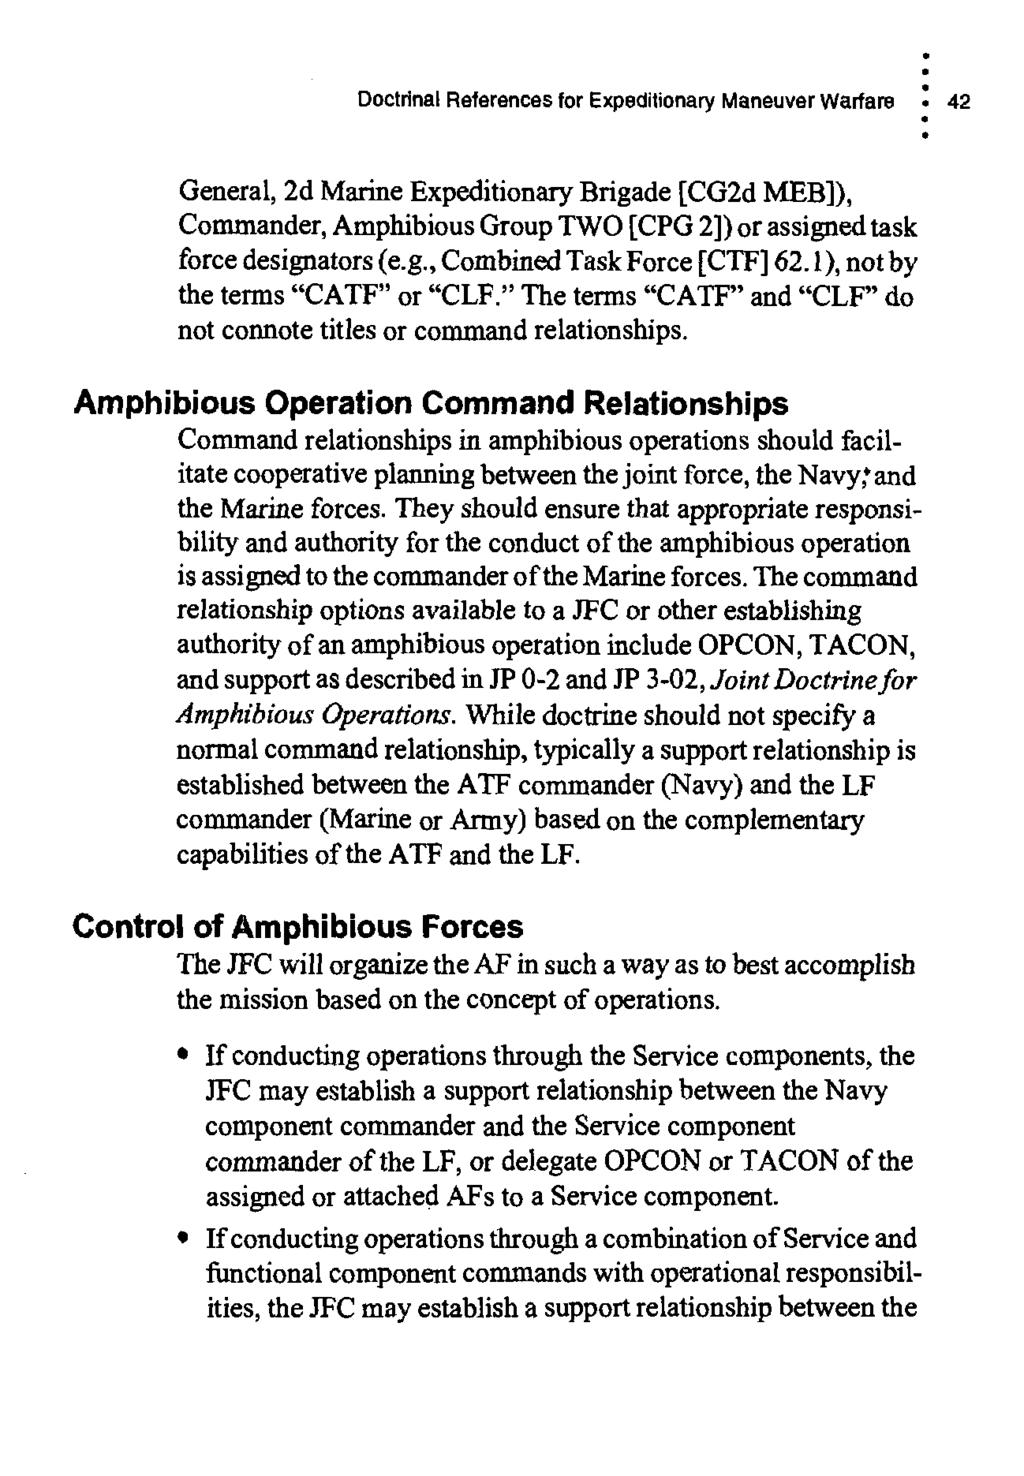 Doctrinal References for Expedilionary Maneuver Warfare : 42 General, 2d Marine Expeditionary Brigade [CG2d MEBI), Commander, Amphibious Group TWO [CPG 2]) or assigned task force designators (e.g., Combined Task Force {CTF] 62.